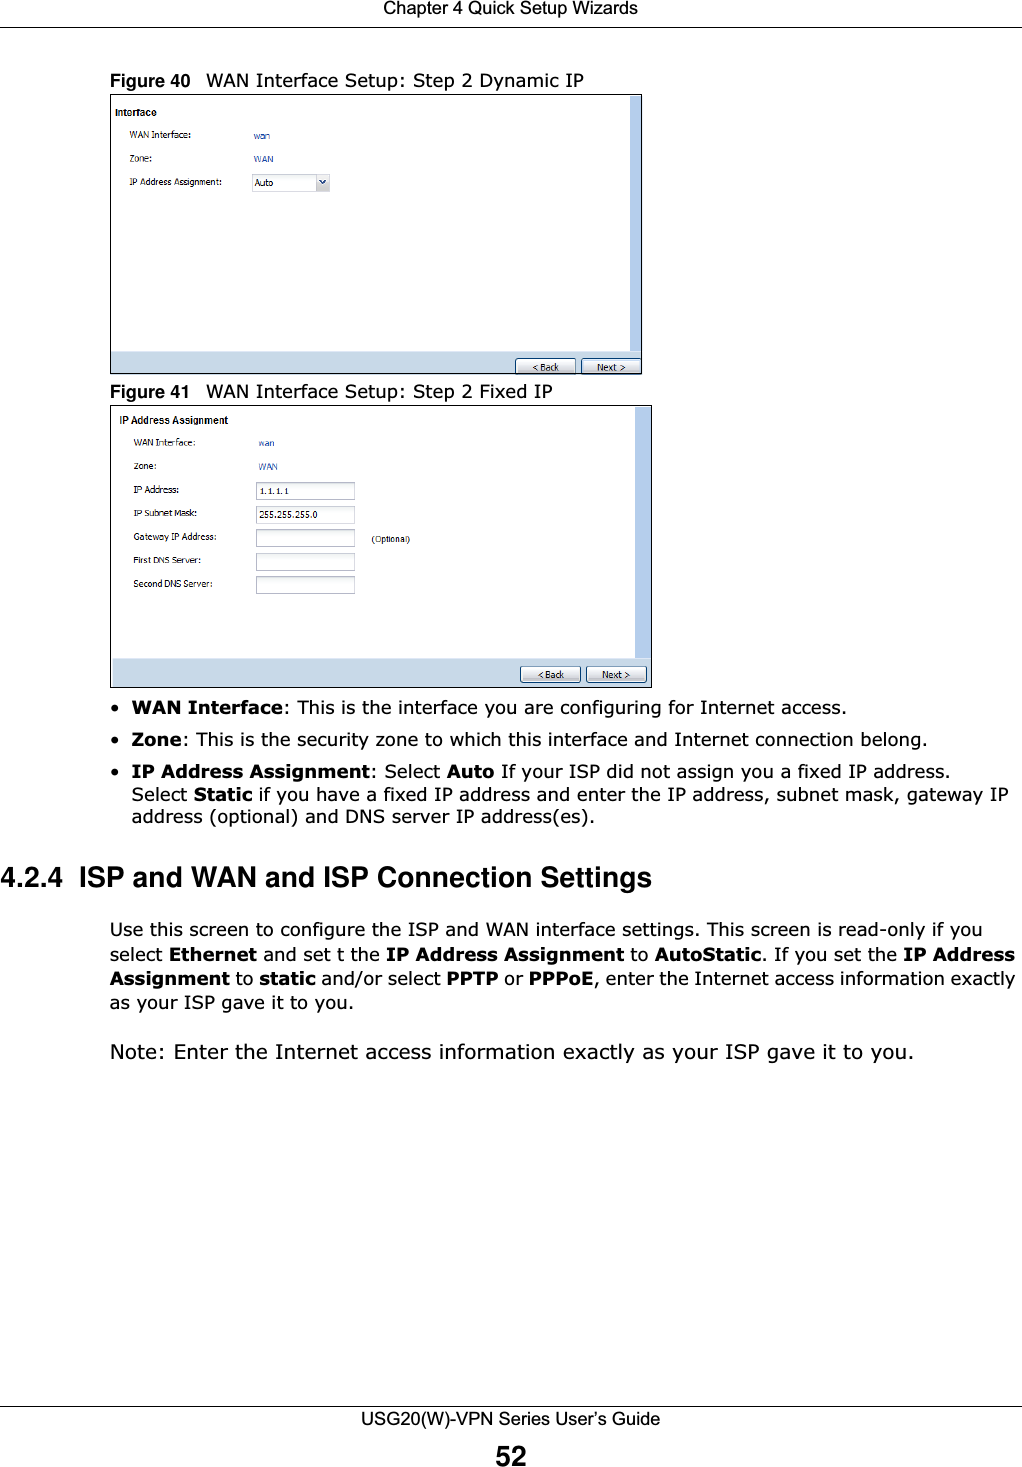 Chapter 4 Quick Setup WizardsUSG20(W)-VPN Series User’s Guide52Figure 40   WAN Interface Setup: Step 2 Dynamic IP  Figure 41   WAN Interface Setup: Step 2 Fixed IP•WAN Interface: This is the interface you are configuring for Internet access.•Zone: This is the security zone to which this interface and Internet connection belong.•IP Address Assignment: Select Auto If your ISP did not assign you a fixed IP address. Select Static if you have a fixed IP address and enter the IP address, subnet mask, gateway IP address (optional) and DNS server IP address(es).4.2.4  ISP and WAN and ISP Connection SettingsUse this screen to configure the ISP and WAN interface settings. This screen is read-only if you select Ethernet and set t the IP Address Assignment to AutoStatic. If you set the IP Address Assignment to static and/or select PPTP or PPPoE, enter the Internet access information exactly as your ISP gave it to you.Note: Enter the Internet access information exactly as your ISP gave it to you.